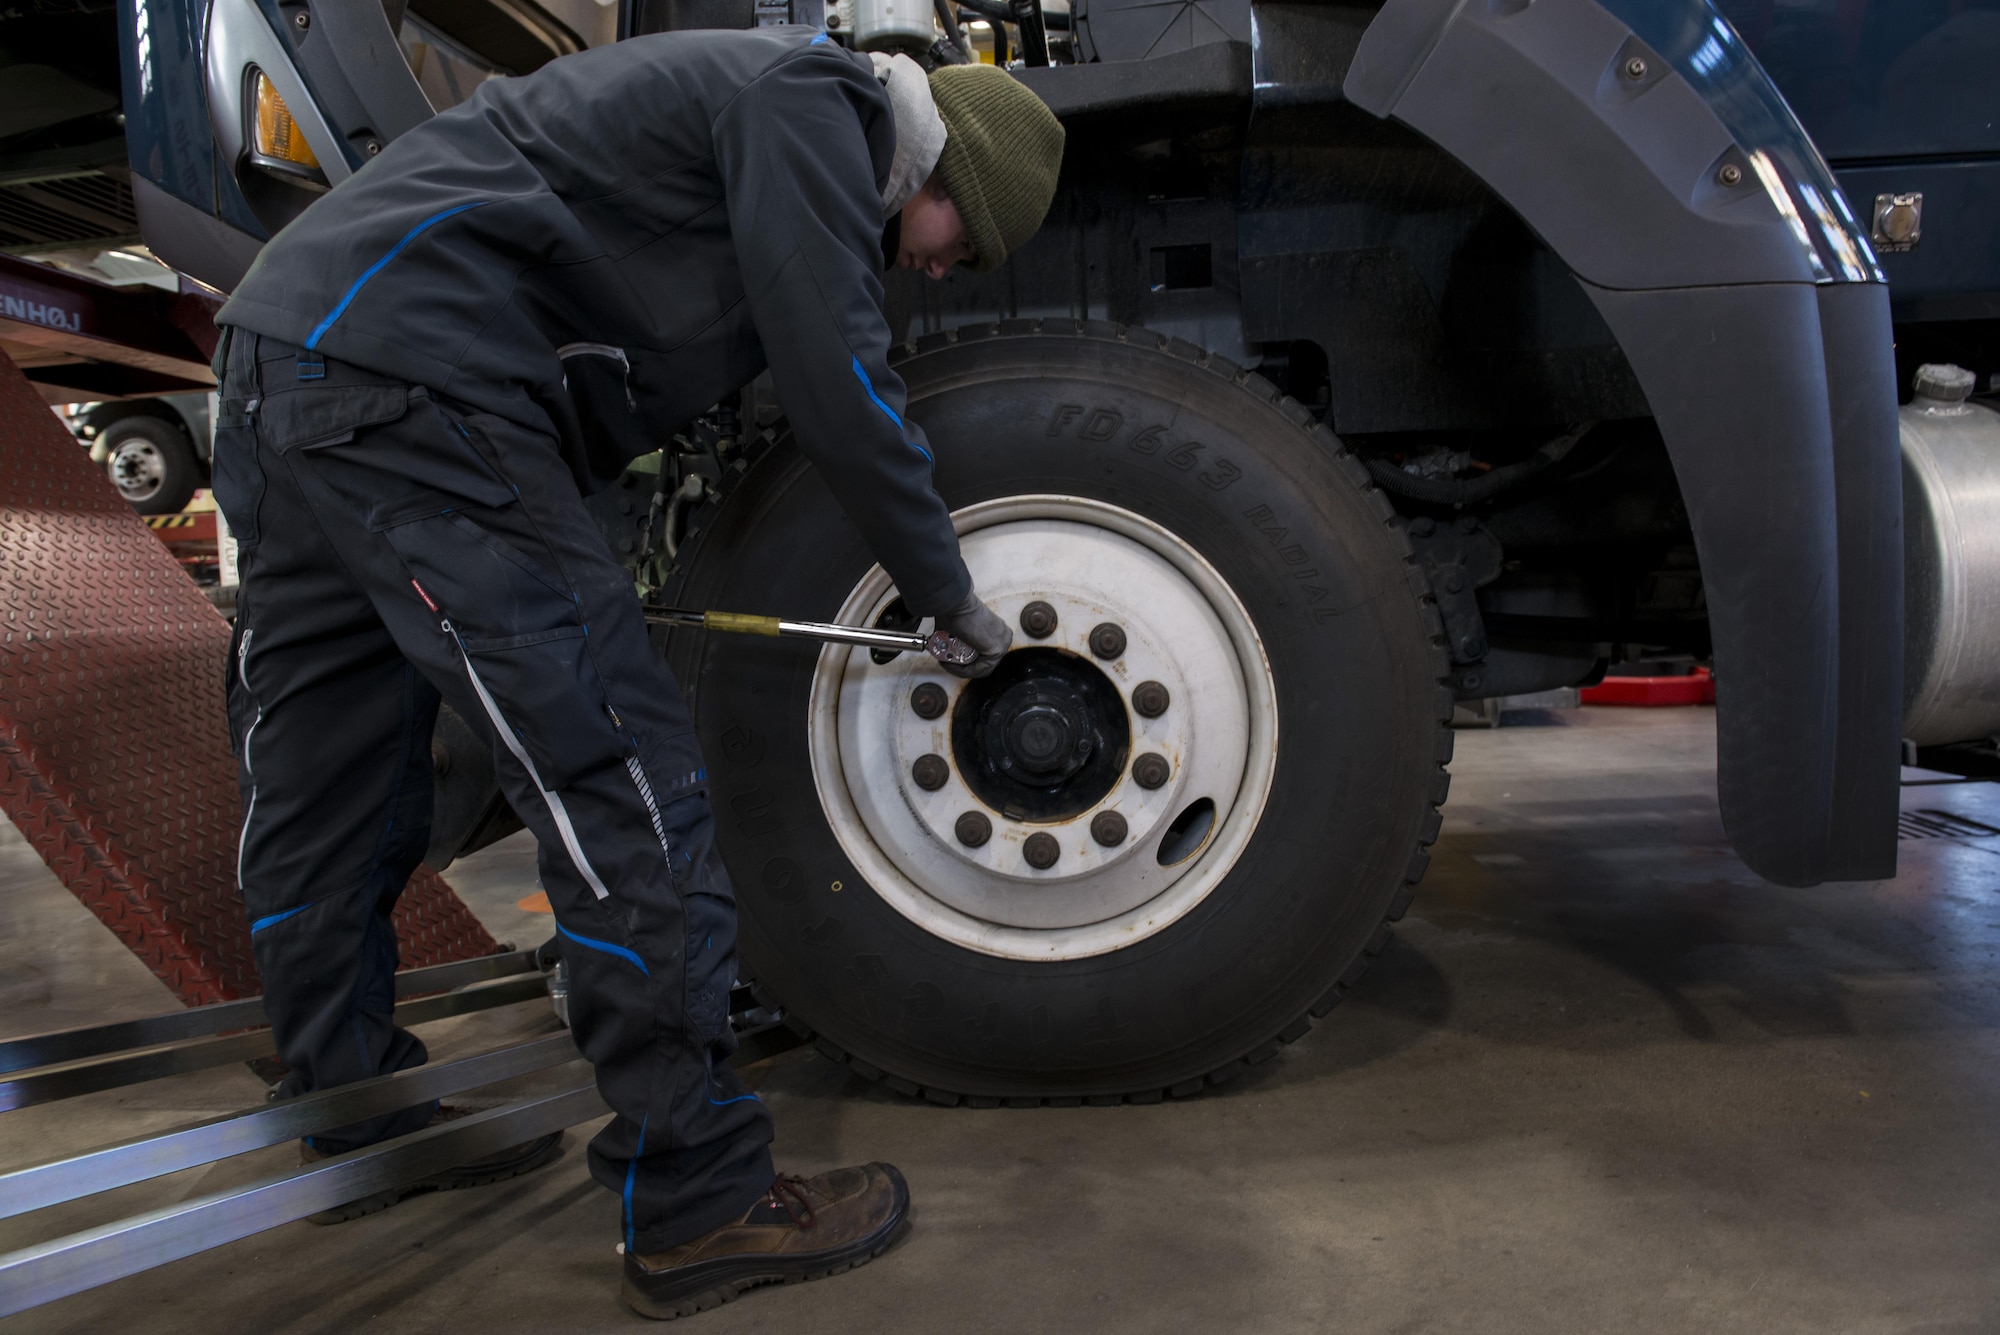 Hendrik Ecker, 86th Vehicle Readiness Squadron vehicle mechanic technician, removes a lug nut from a tire at Ramstein Air Base, Germany, Nov. 14, 2016. Ramstein recently revived its Local National Apprenticeship program, choosing 21 local nationals, including Ecker, for vocational training. He will be working alongside the 86th VRS Airmen for three-and-a-half to four years. (U.S. Air Force photo by Senior Airman Tryphena Mayhugh)